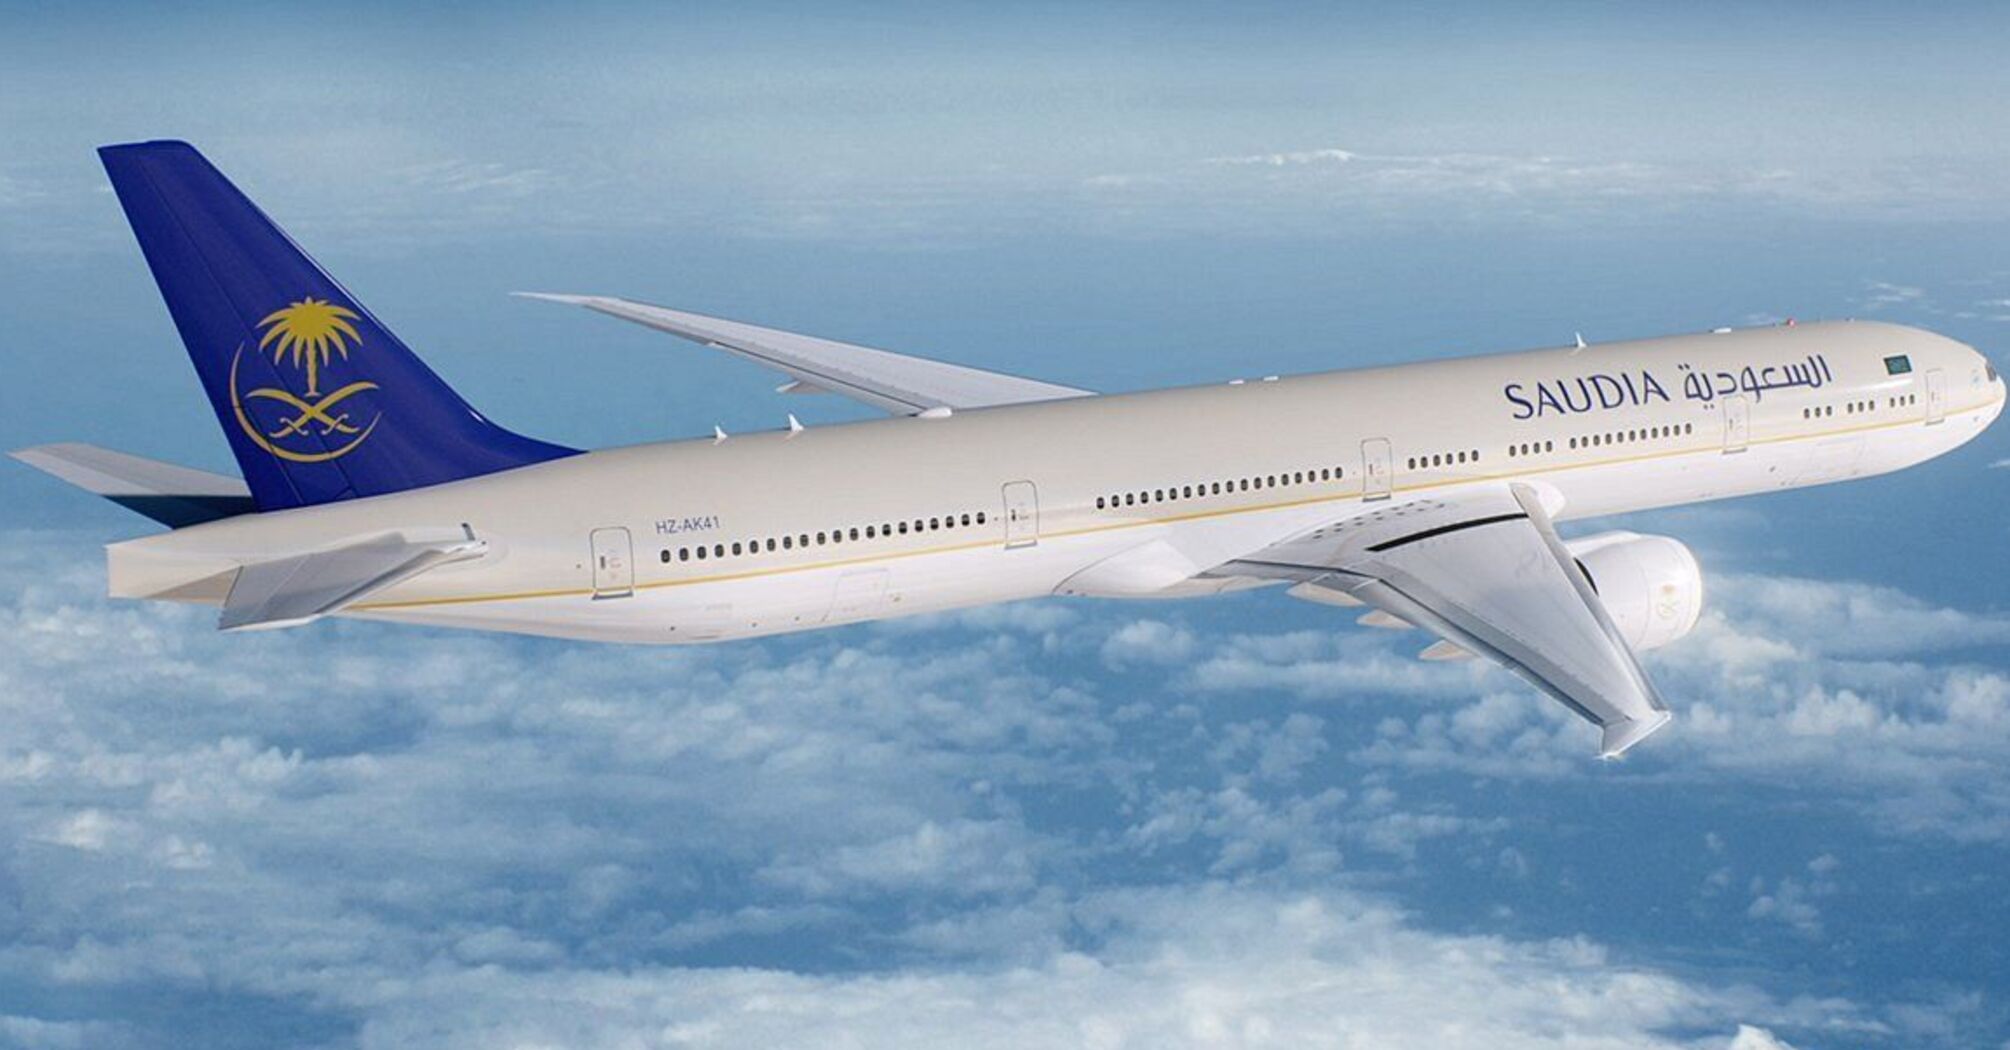 Saudi Arabian Airlines compensation for delayed or cancelled flights